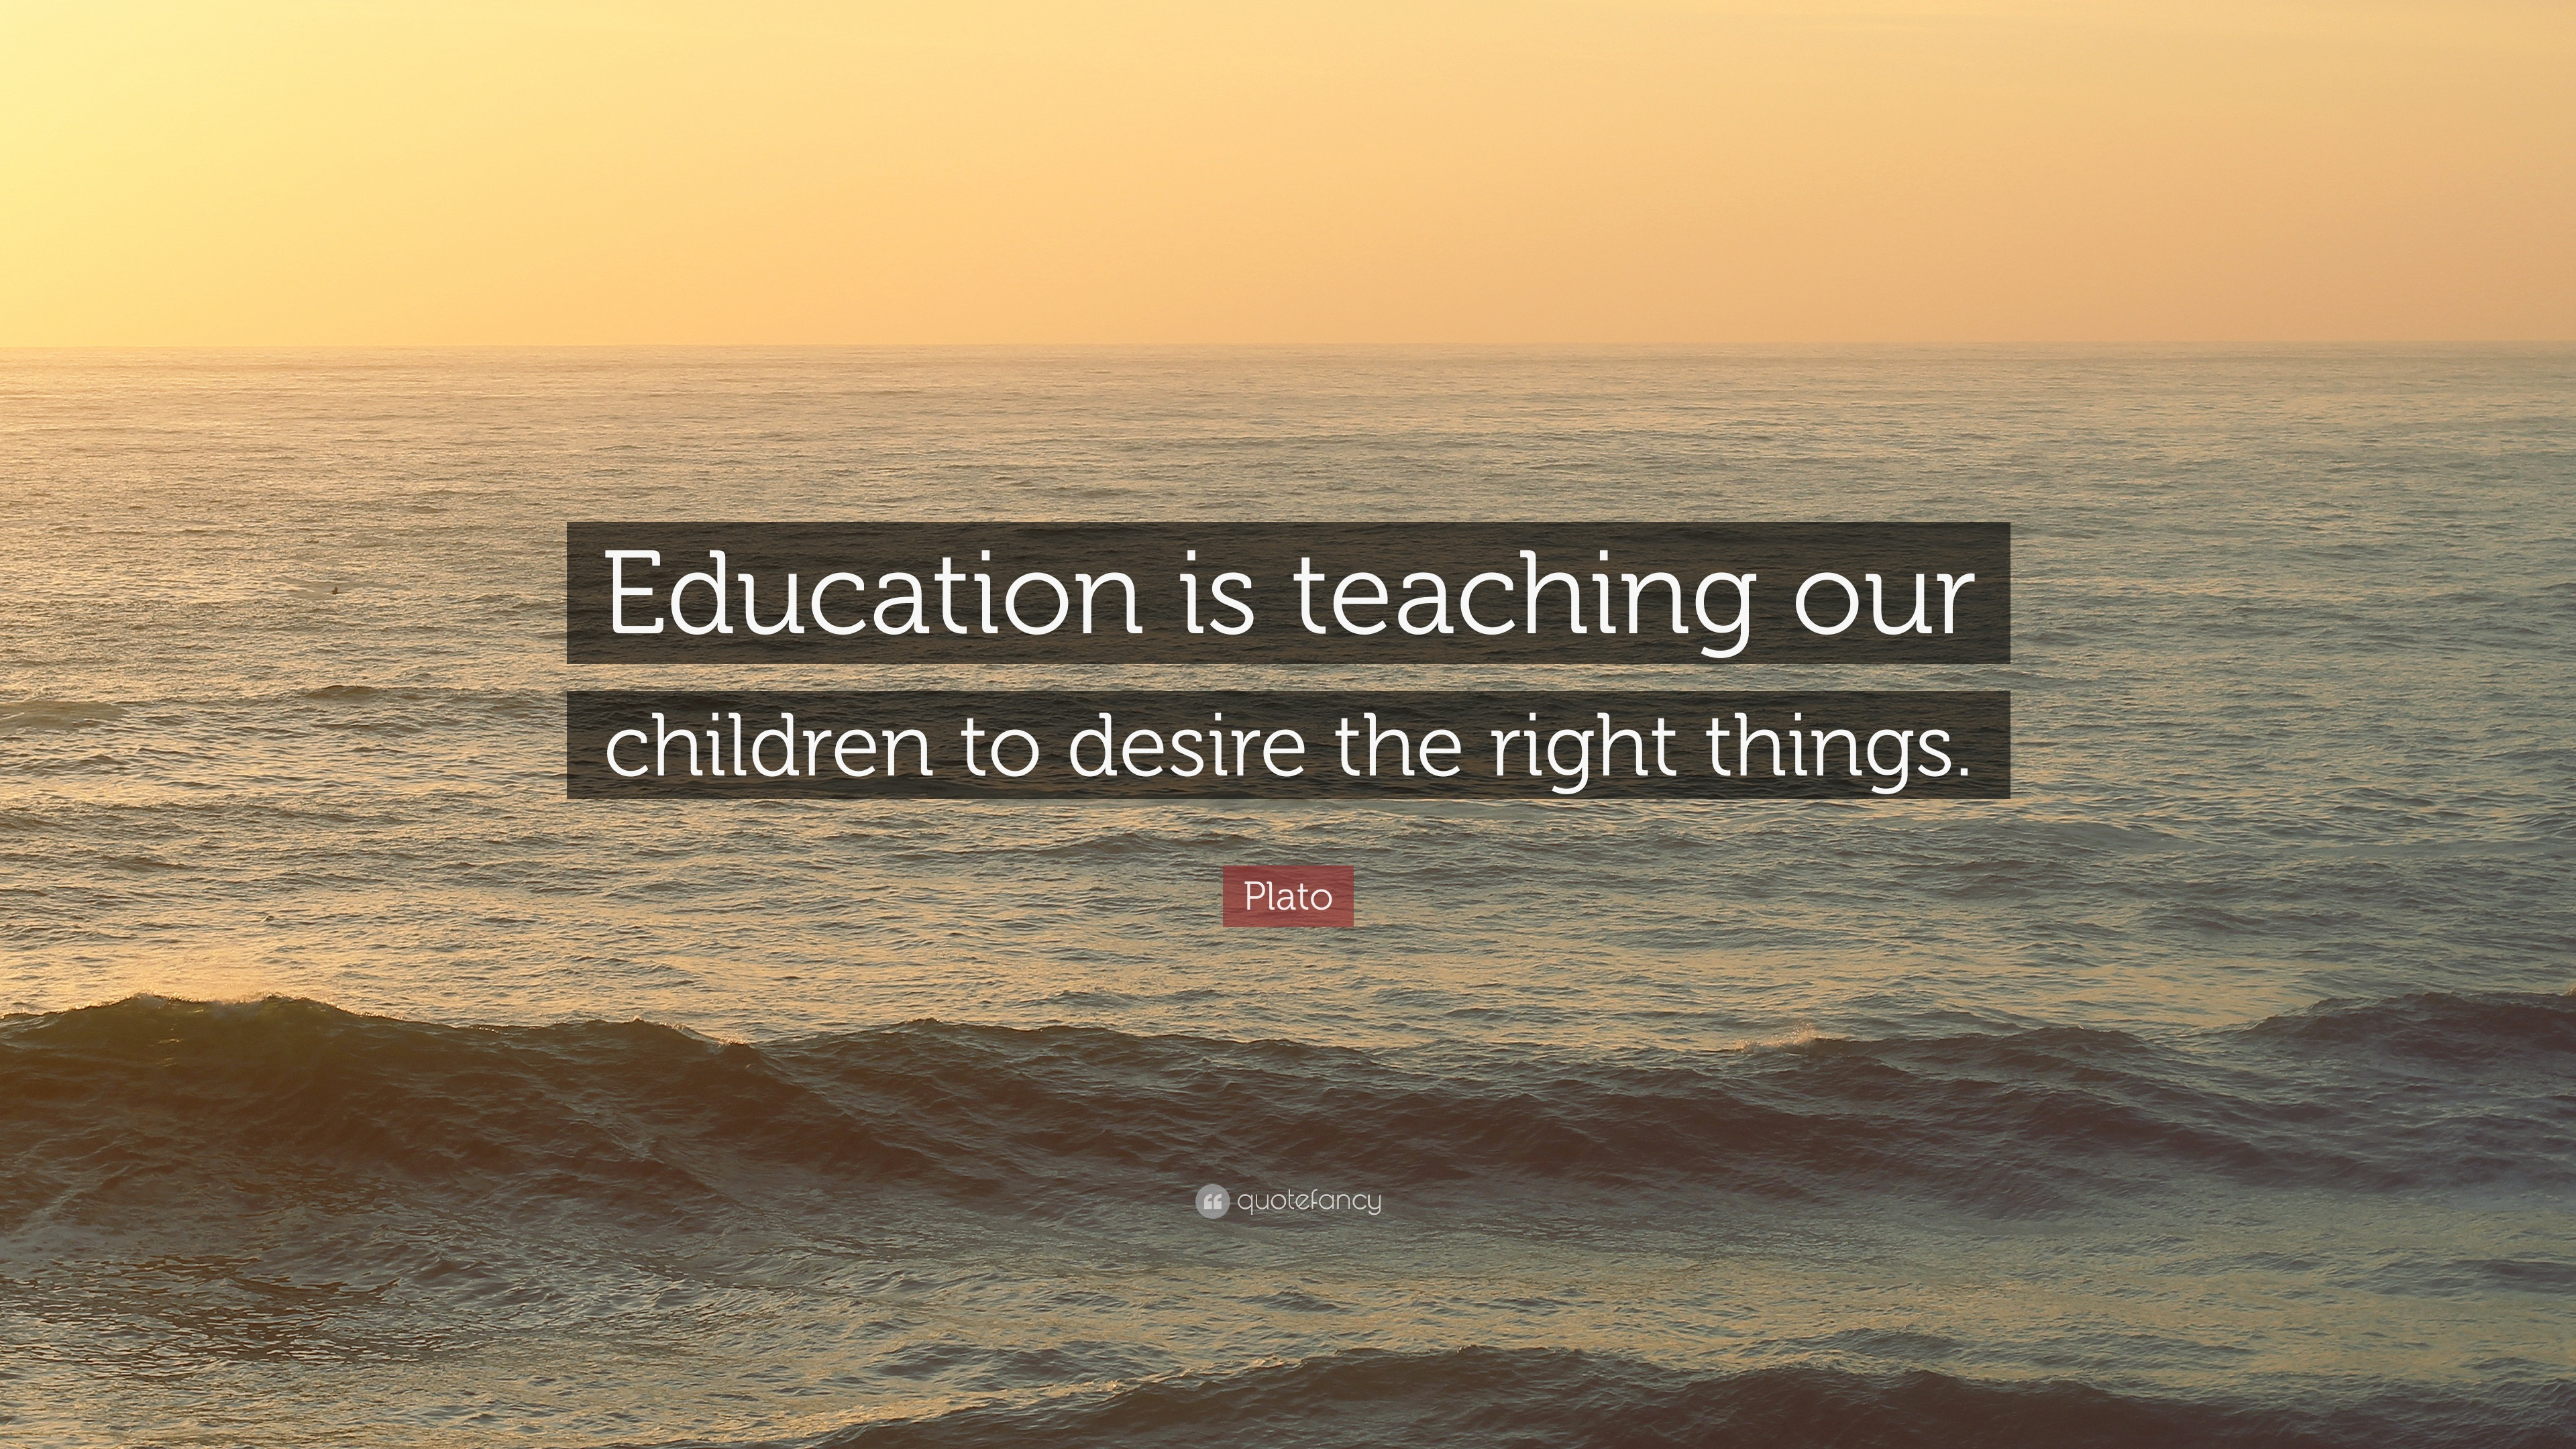 Plato Quotes On Education
 Plato Quote “Education is teaching our children to desire